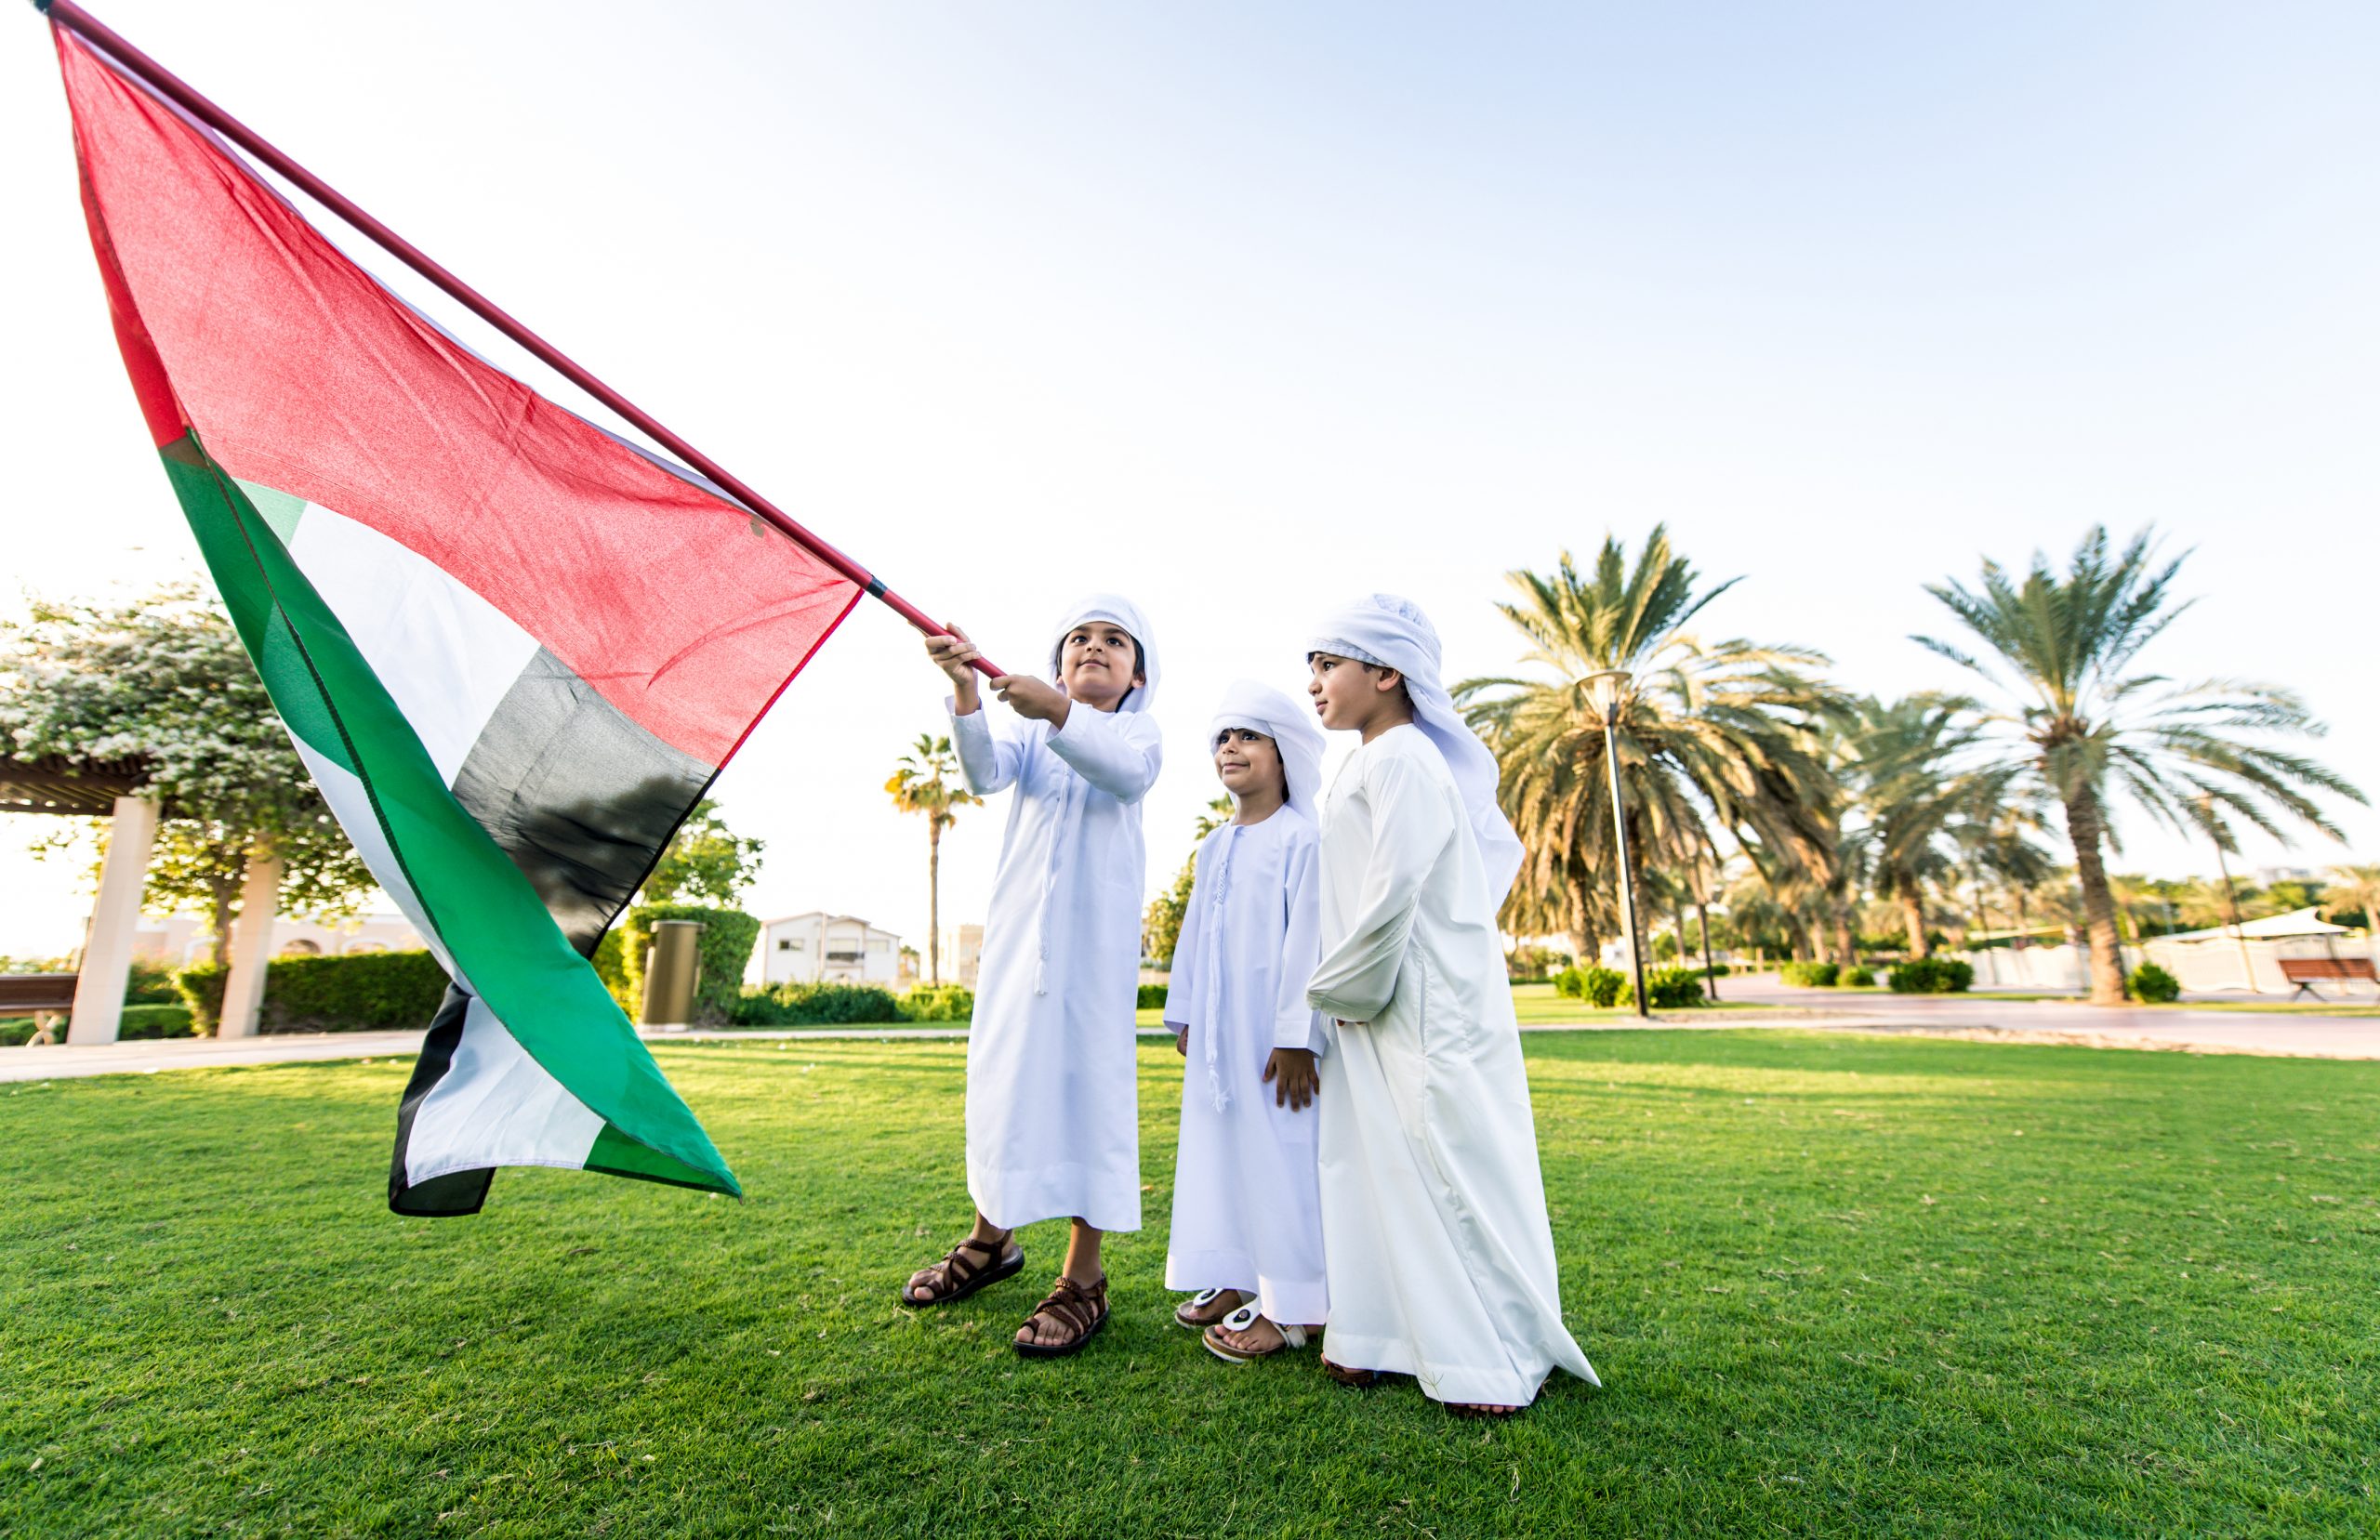 Children playing together in Dubai in the park. Group of kids wearing traditional kandura white dress from arab emirates